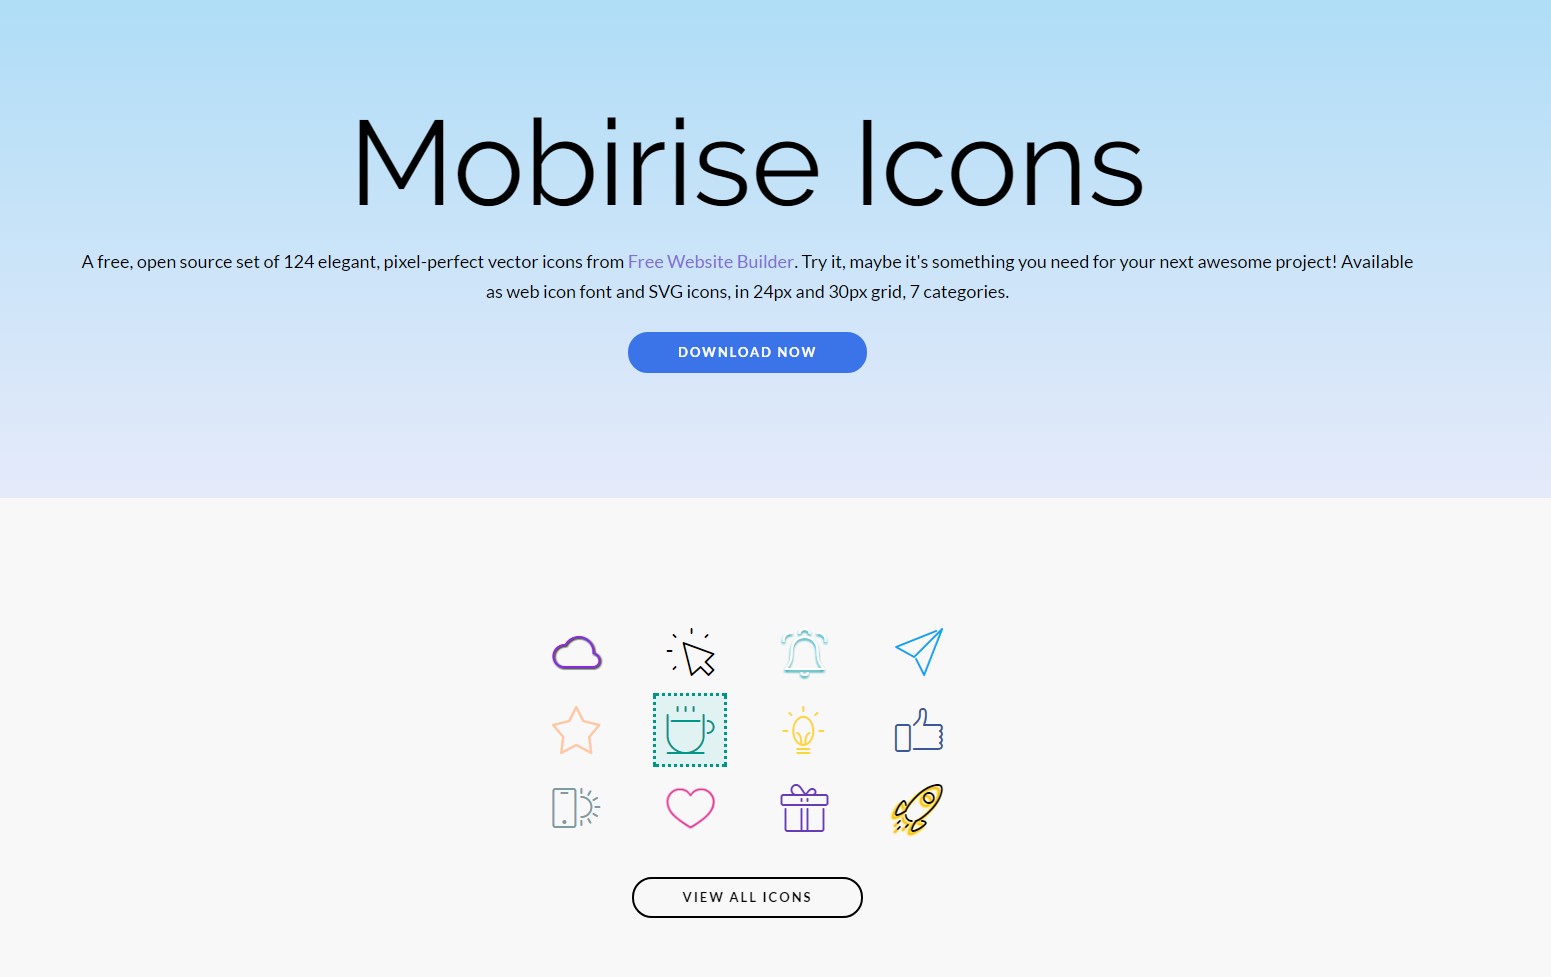 mobirise icons package